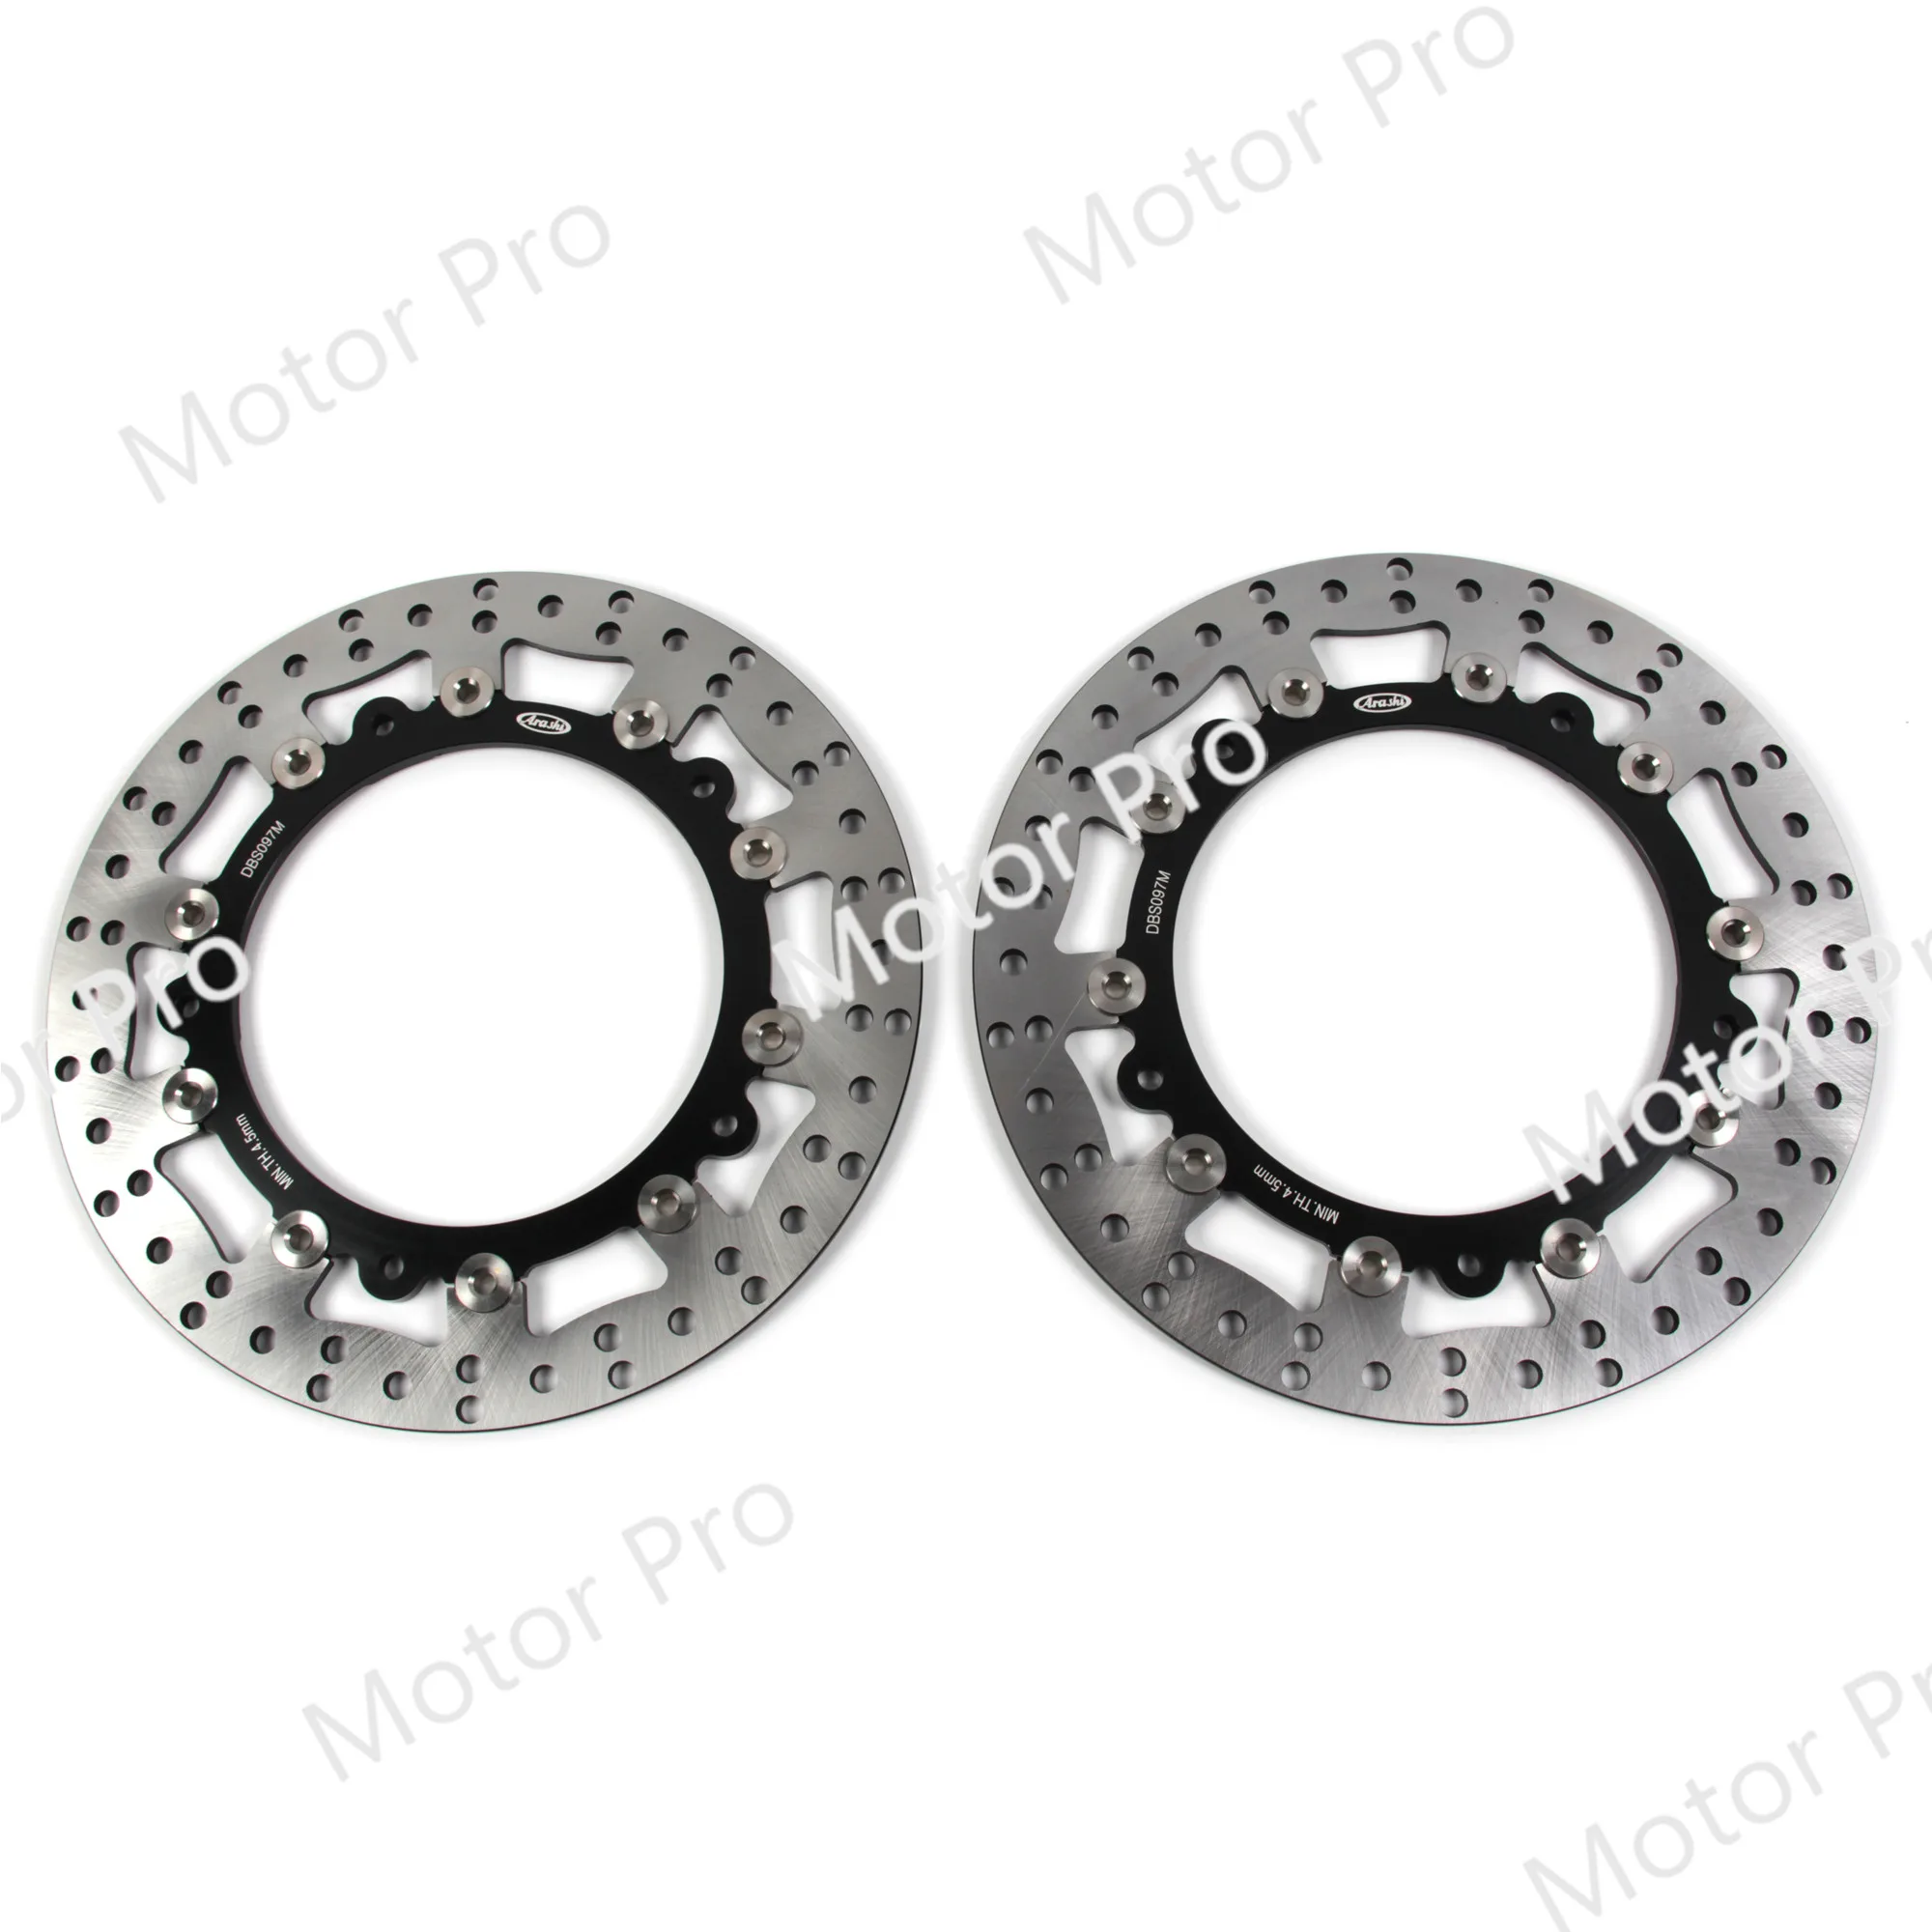 

CNC Floating Front Brake Discs Disk Rotors for BMW R 1100 GS R110GS 1994 - 2001 1995 1996 1997 / R 1100 S R1100S 1998 1999 2000